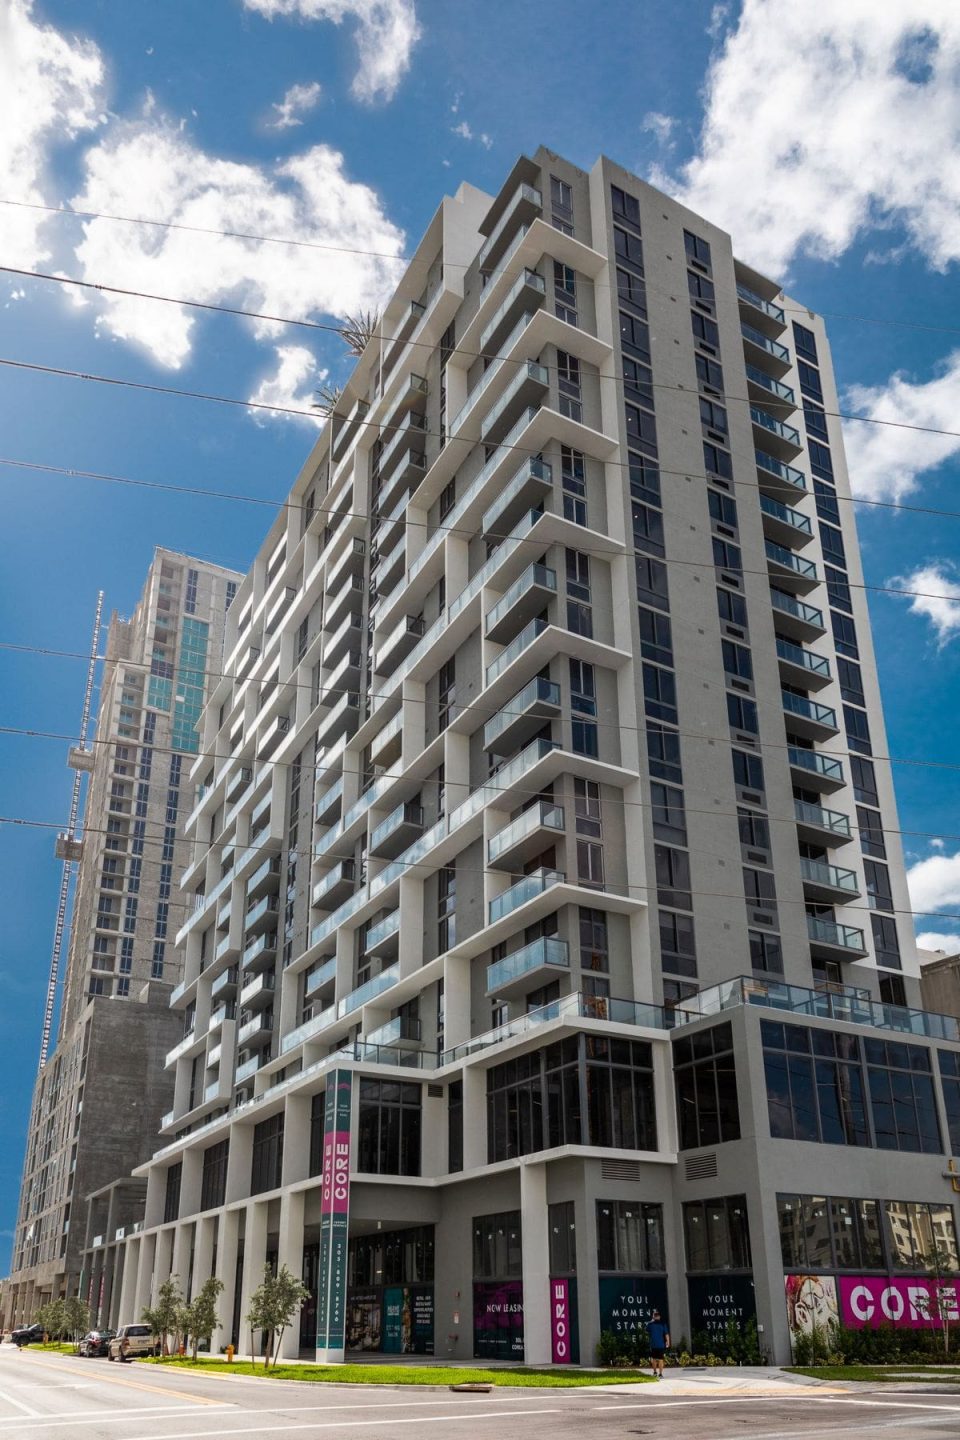 CORE apartment tower opens at Link at Douglas mixed-use development